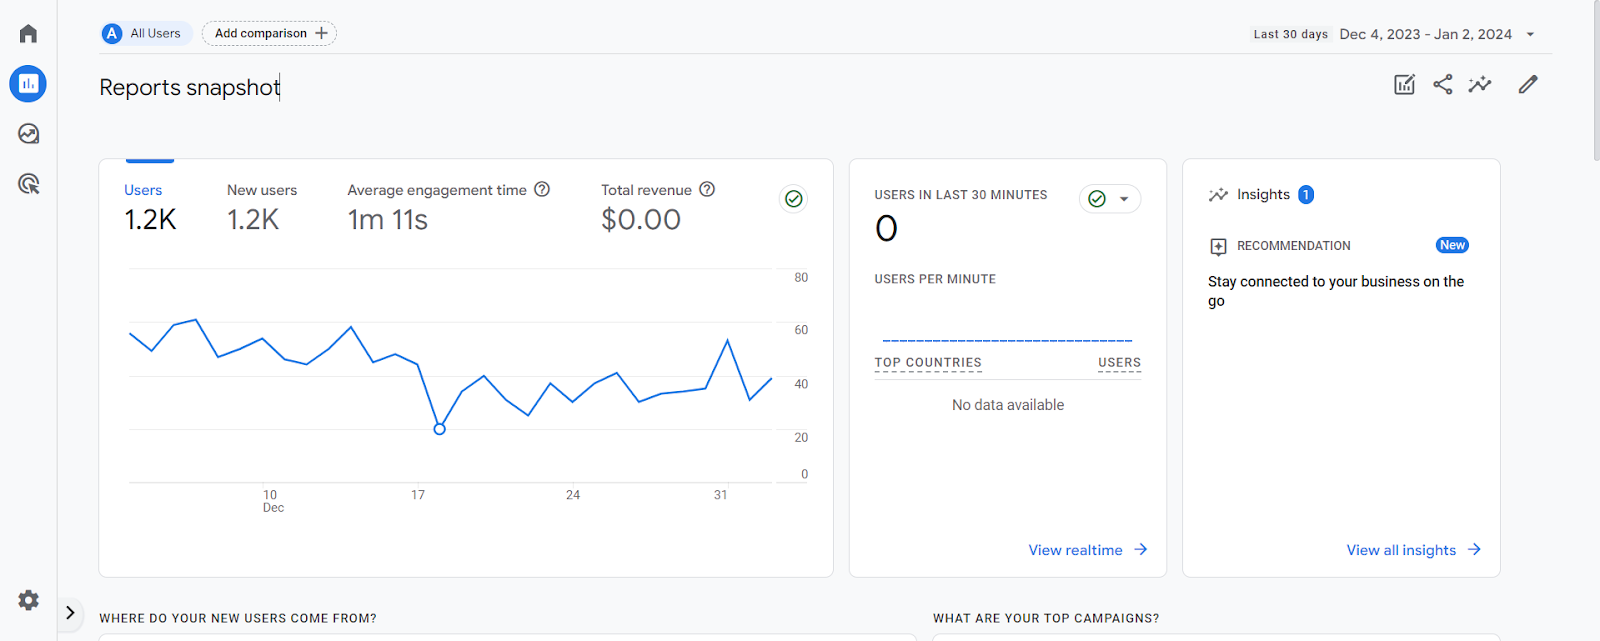 A snapshot from the Reports tab in Google Analytics 4